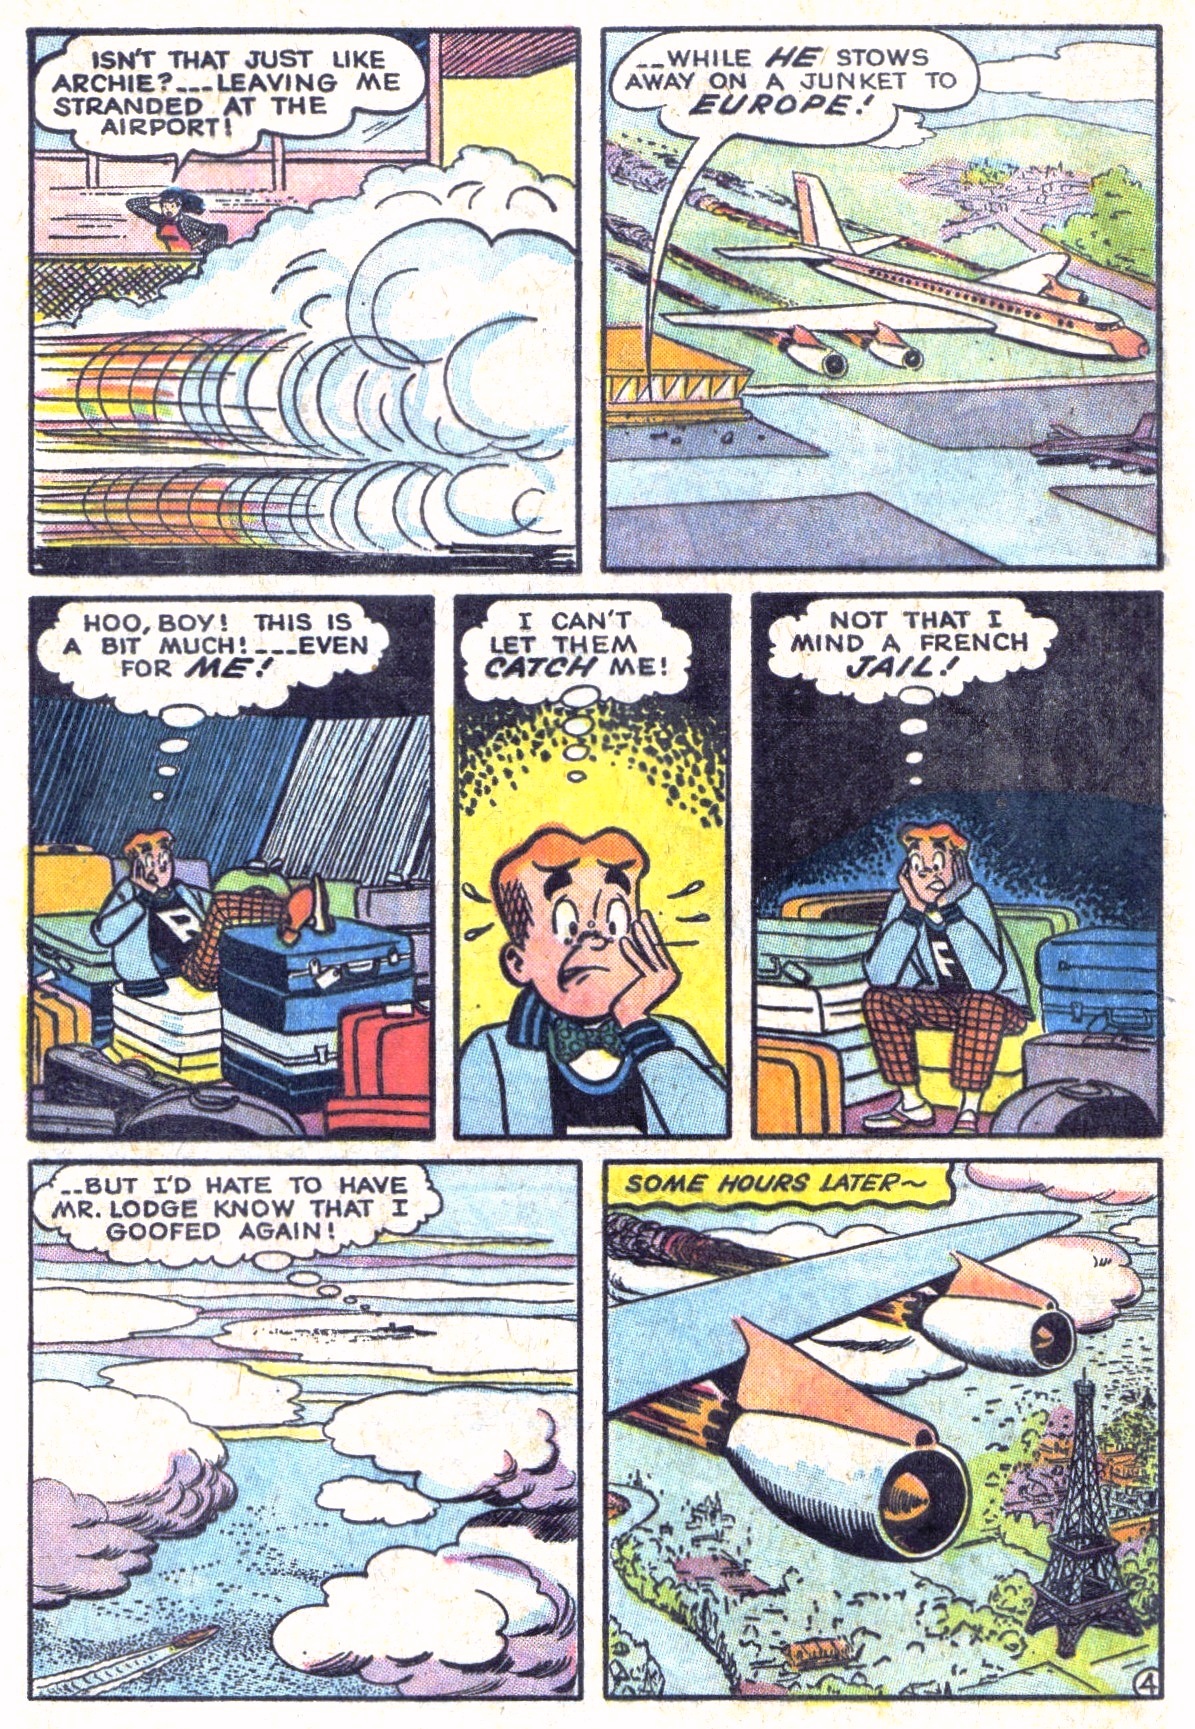 Archie (1960) 134 Page 16